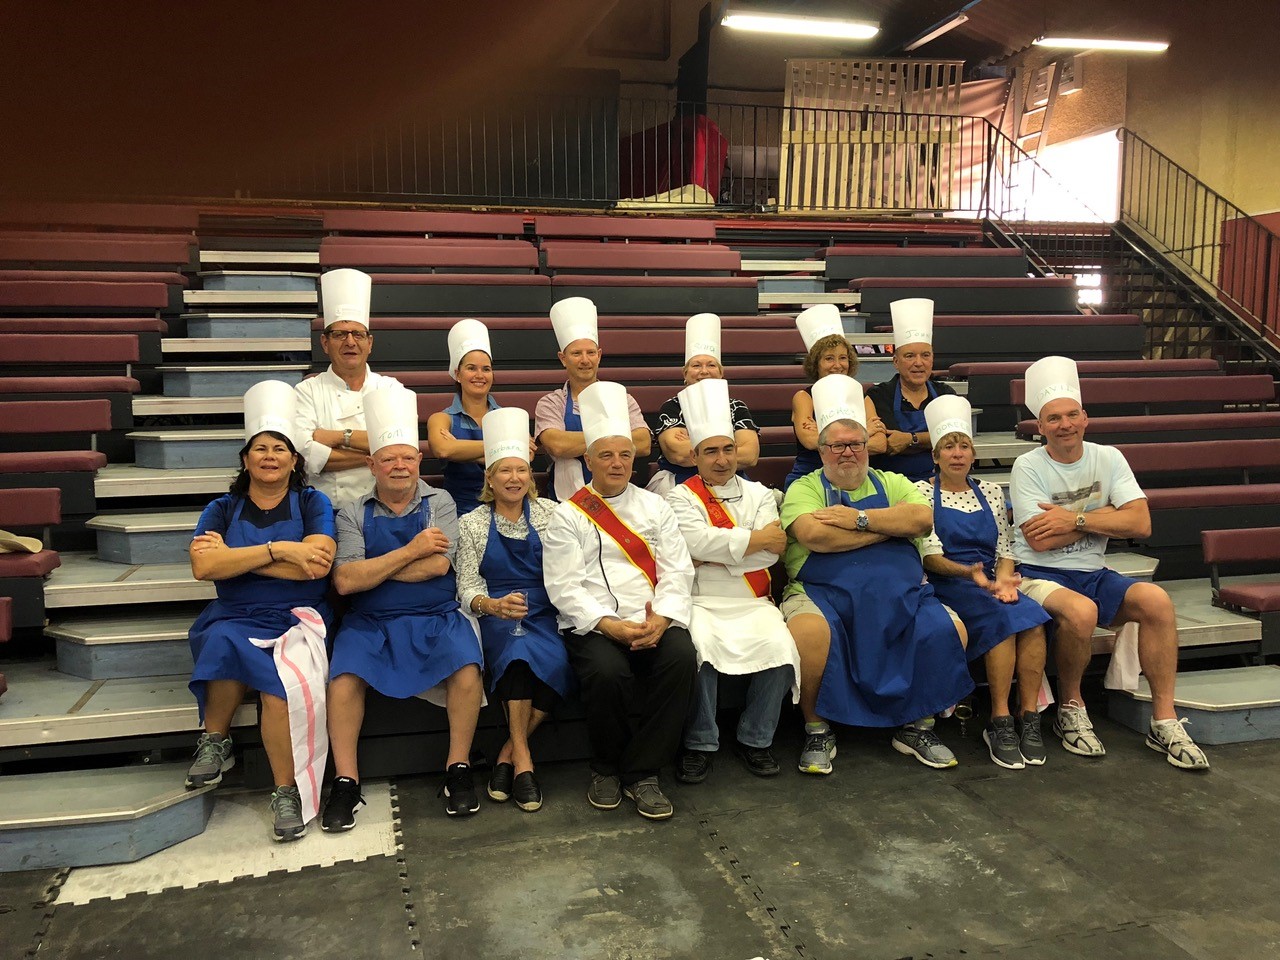 Guests posing with chefs in chef outfits